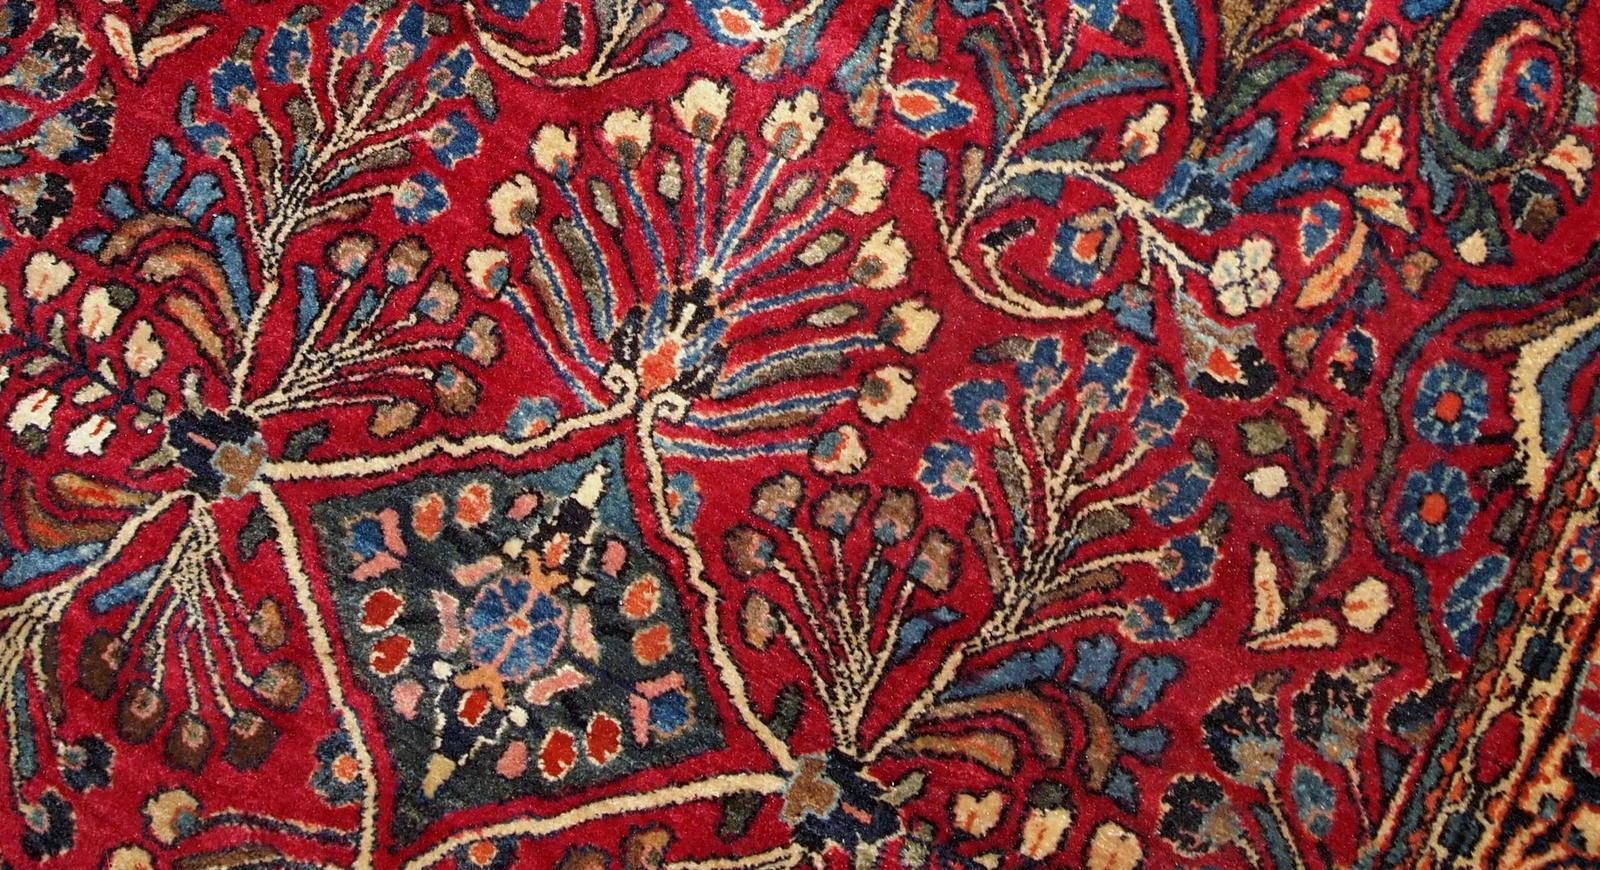 Handmade antique Sarouk rug in bright wool. It has been made in the beginning of 20th century in Middle East region.

-Condition: original good,

circa 1920s,

-Size: 3.6' x 5.3' (109cm x 161cm),

-Material: wool,

-Country of origin: